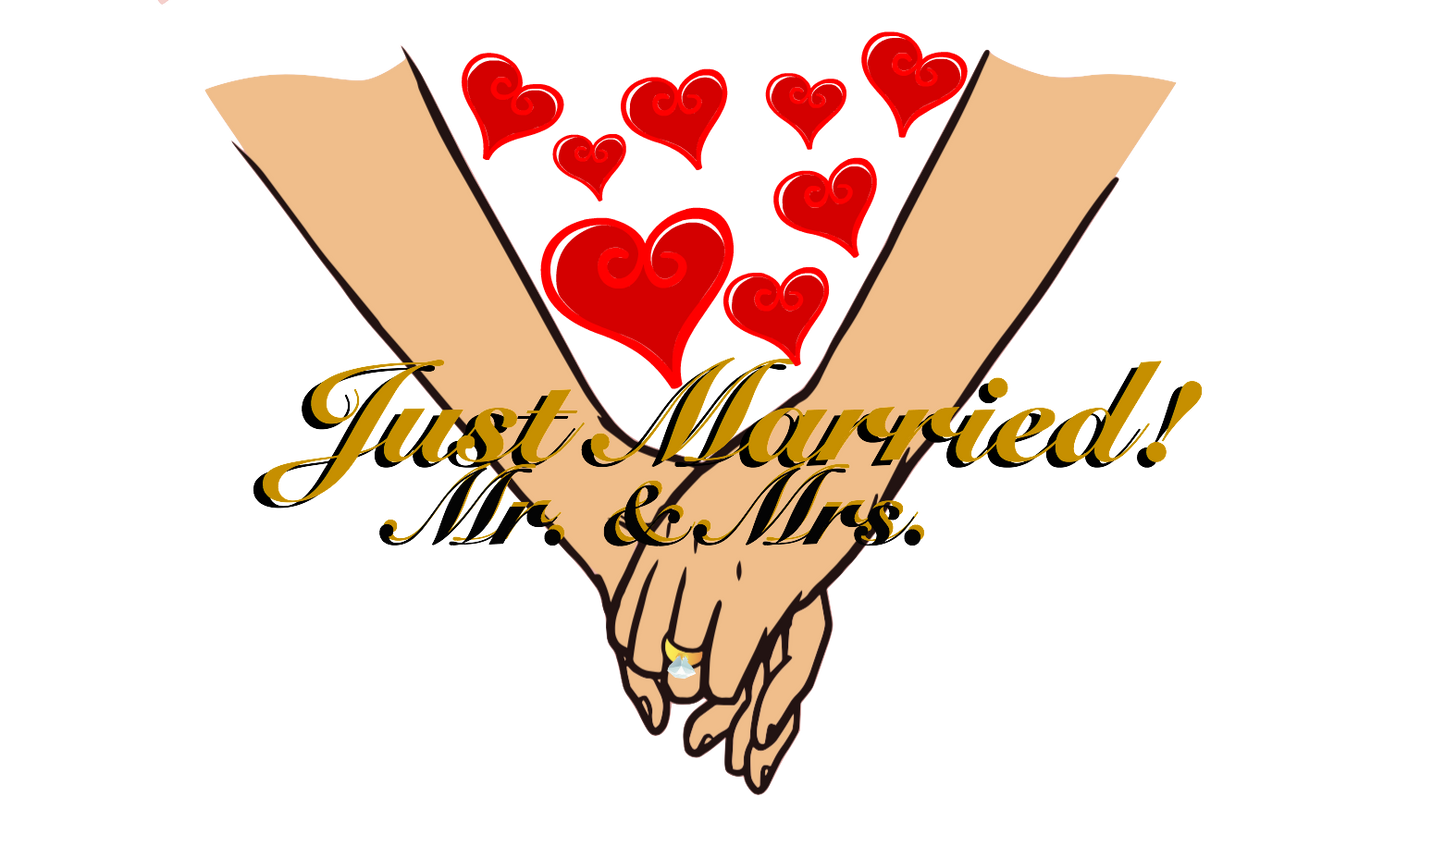 Just Married! Holding Hands wearing Wedding ring with hearts Mr. & Mrs.